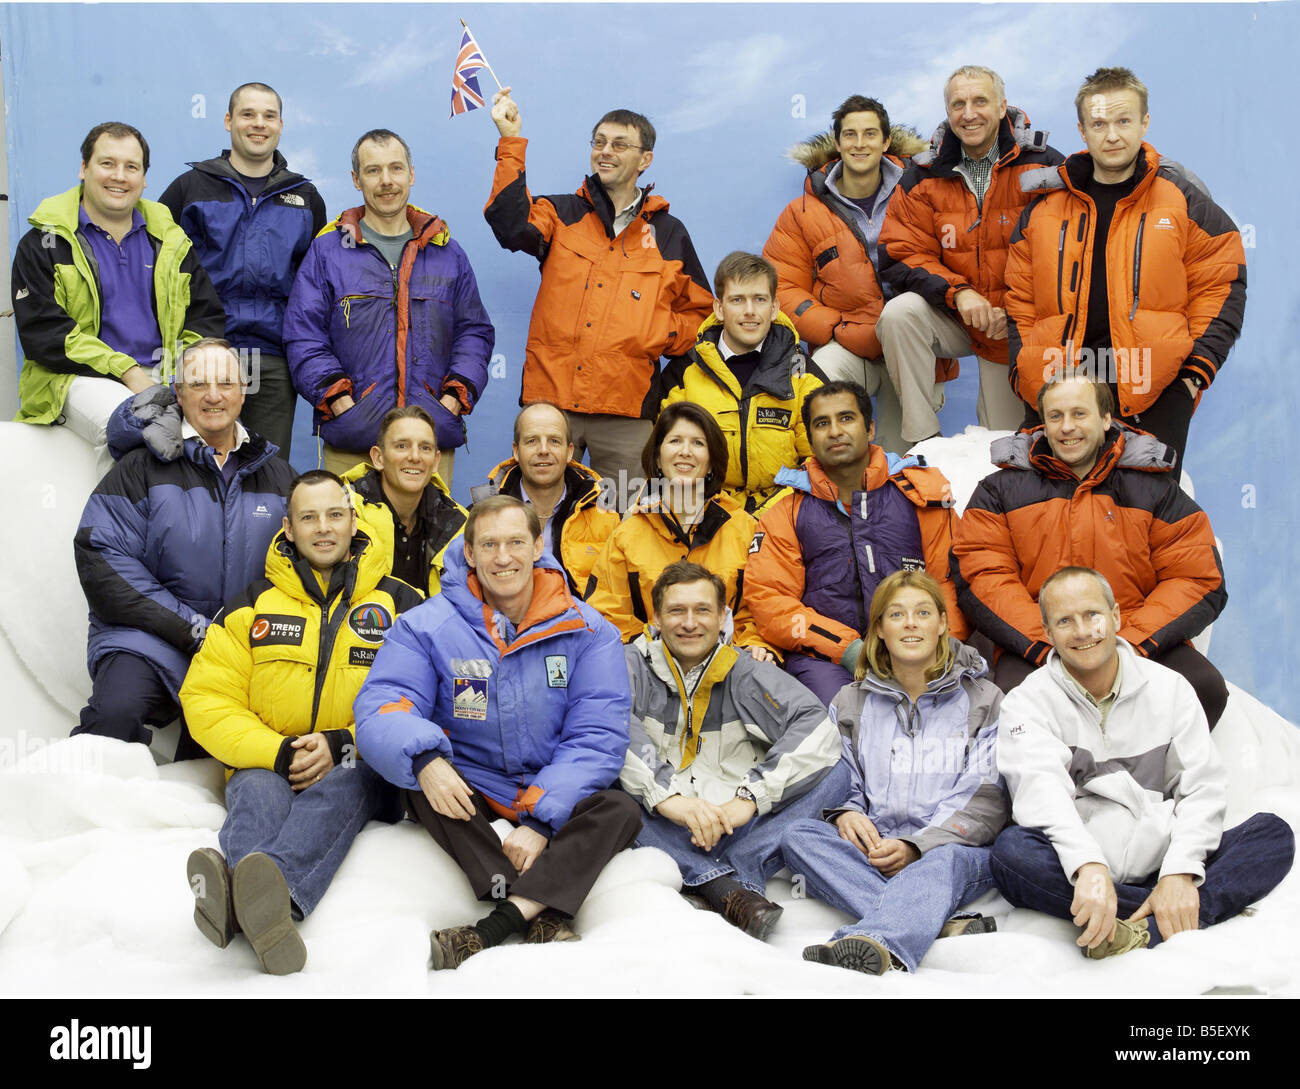 Everest 50th anniversary May 2003 British climbers who have conquered Mount Everest L R standing Mark Warham Stuart Peacock Crag Jones Graham Ratcliffe Bear Grylls Chris Brown and Jon Tinker L R middle row Michael Bronco Lane Neil Laughton Sandy Allan Rebecca Stephens Geoffrey Stanford behind yellow jacket Sandeep Dhillon and Eric Blakeley L R front Chris Mothersdale Jonathan Pratt David Hempleman Adams Polly Murray and Andrew Salter Stock Photo